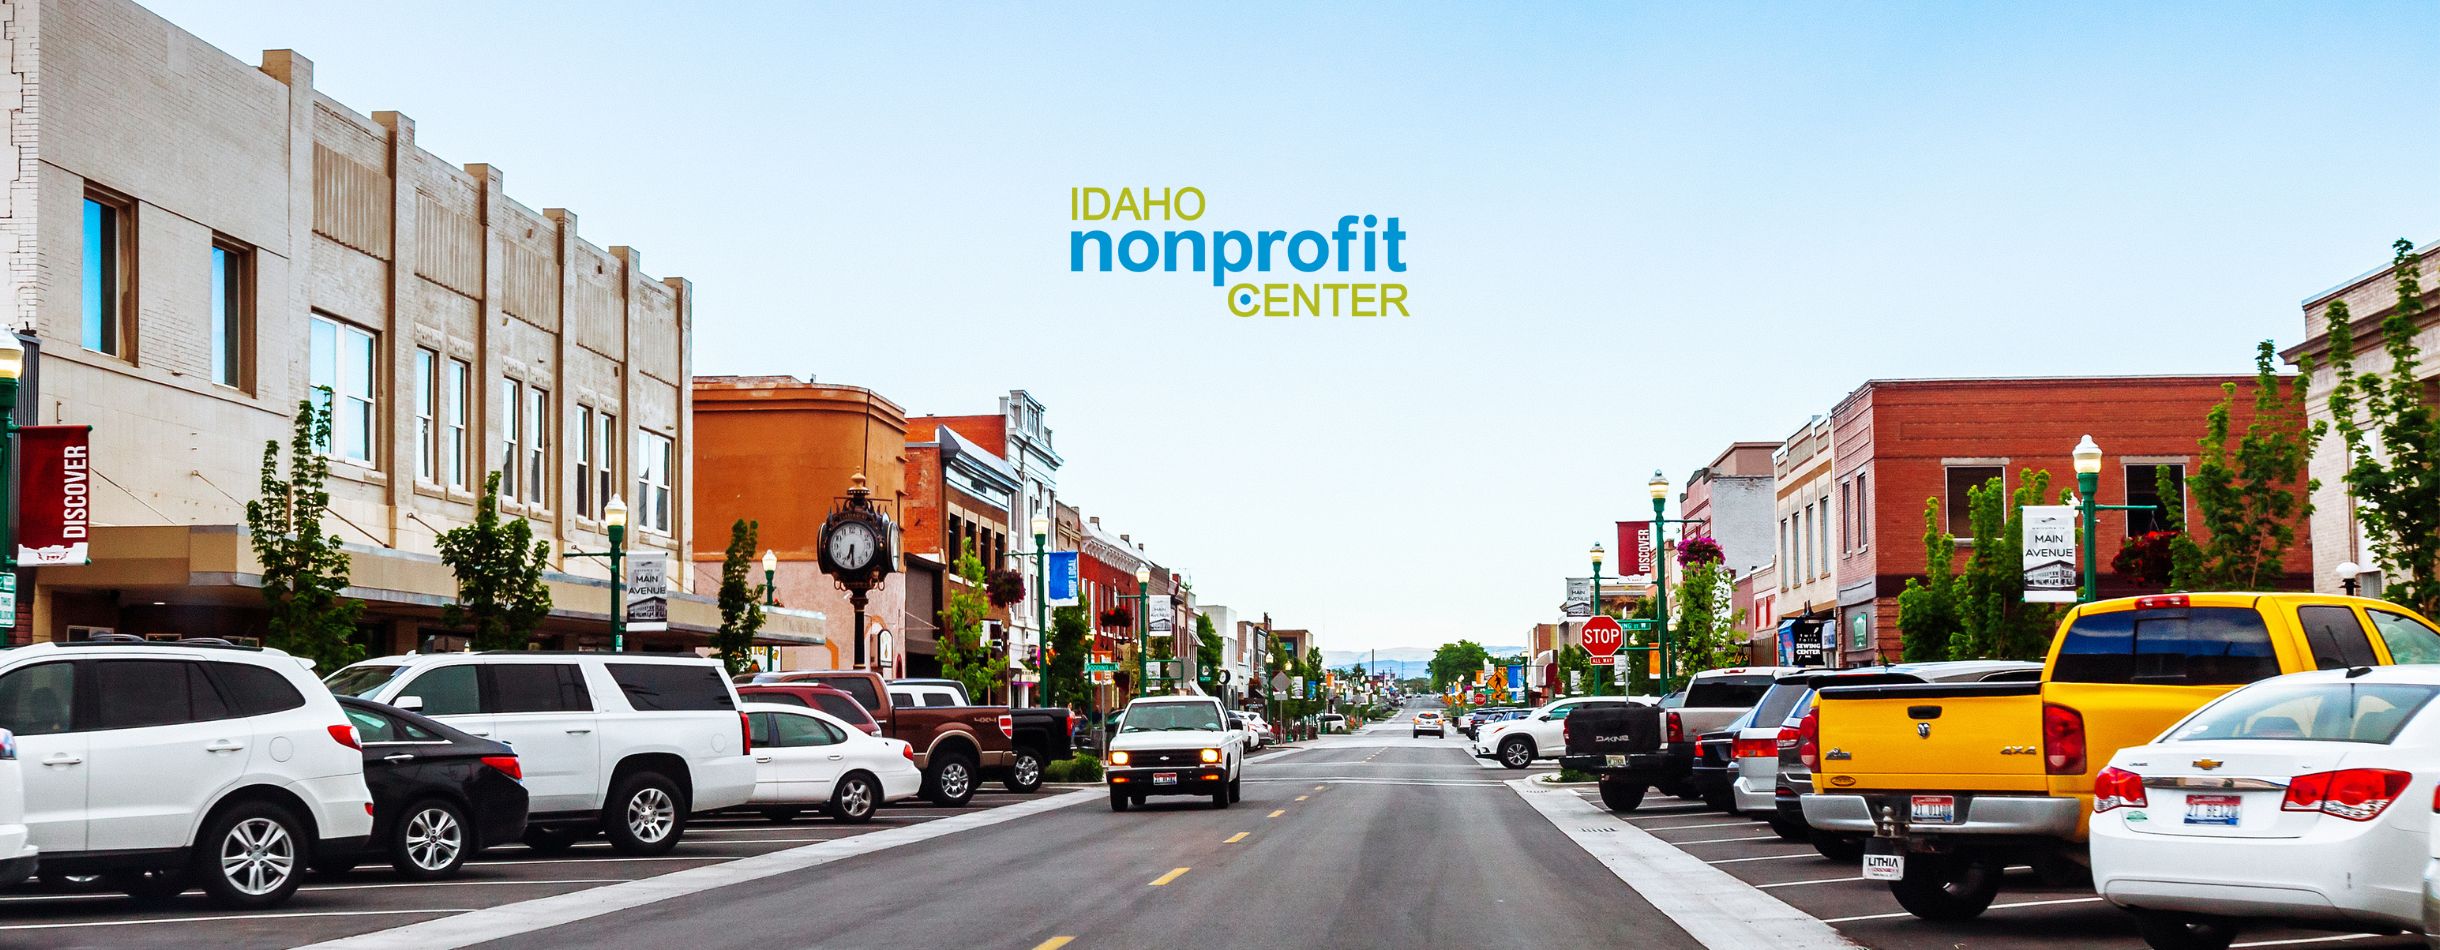 A downtown area in Idaho is shown with various cars parked on the and people shopping at nearby businesses. The Idaho Nonprofit Center Logo is displayed at the top of the image, with the sky being its backdrop.